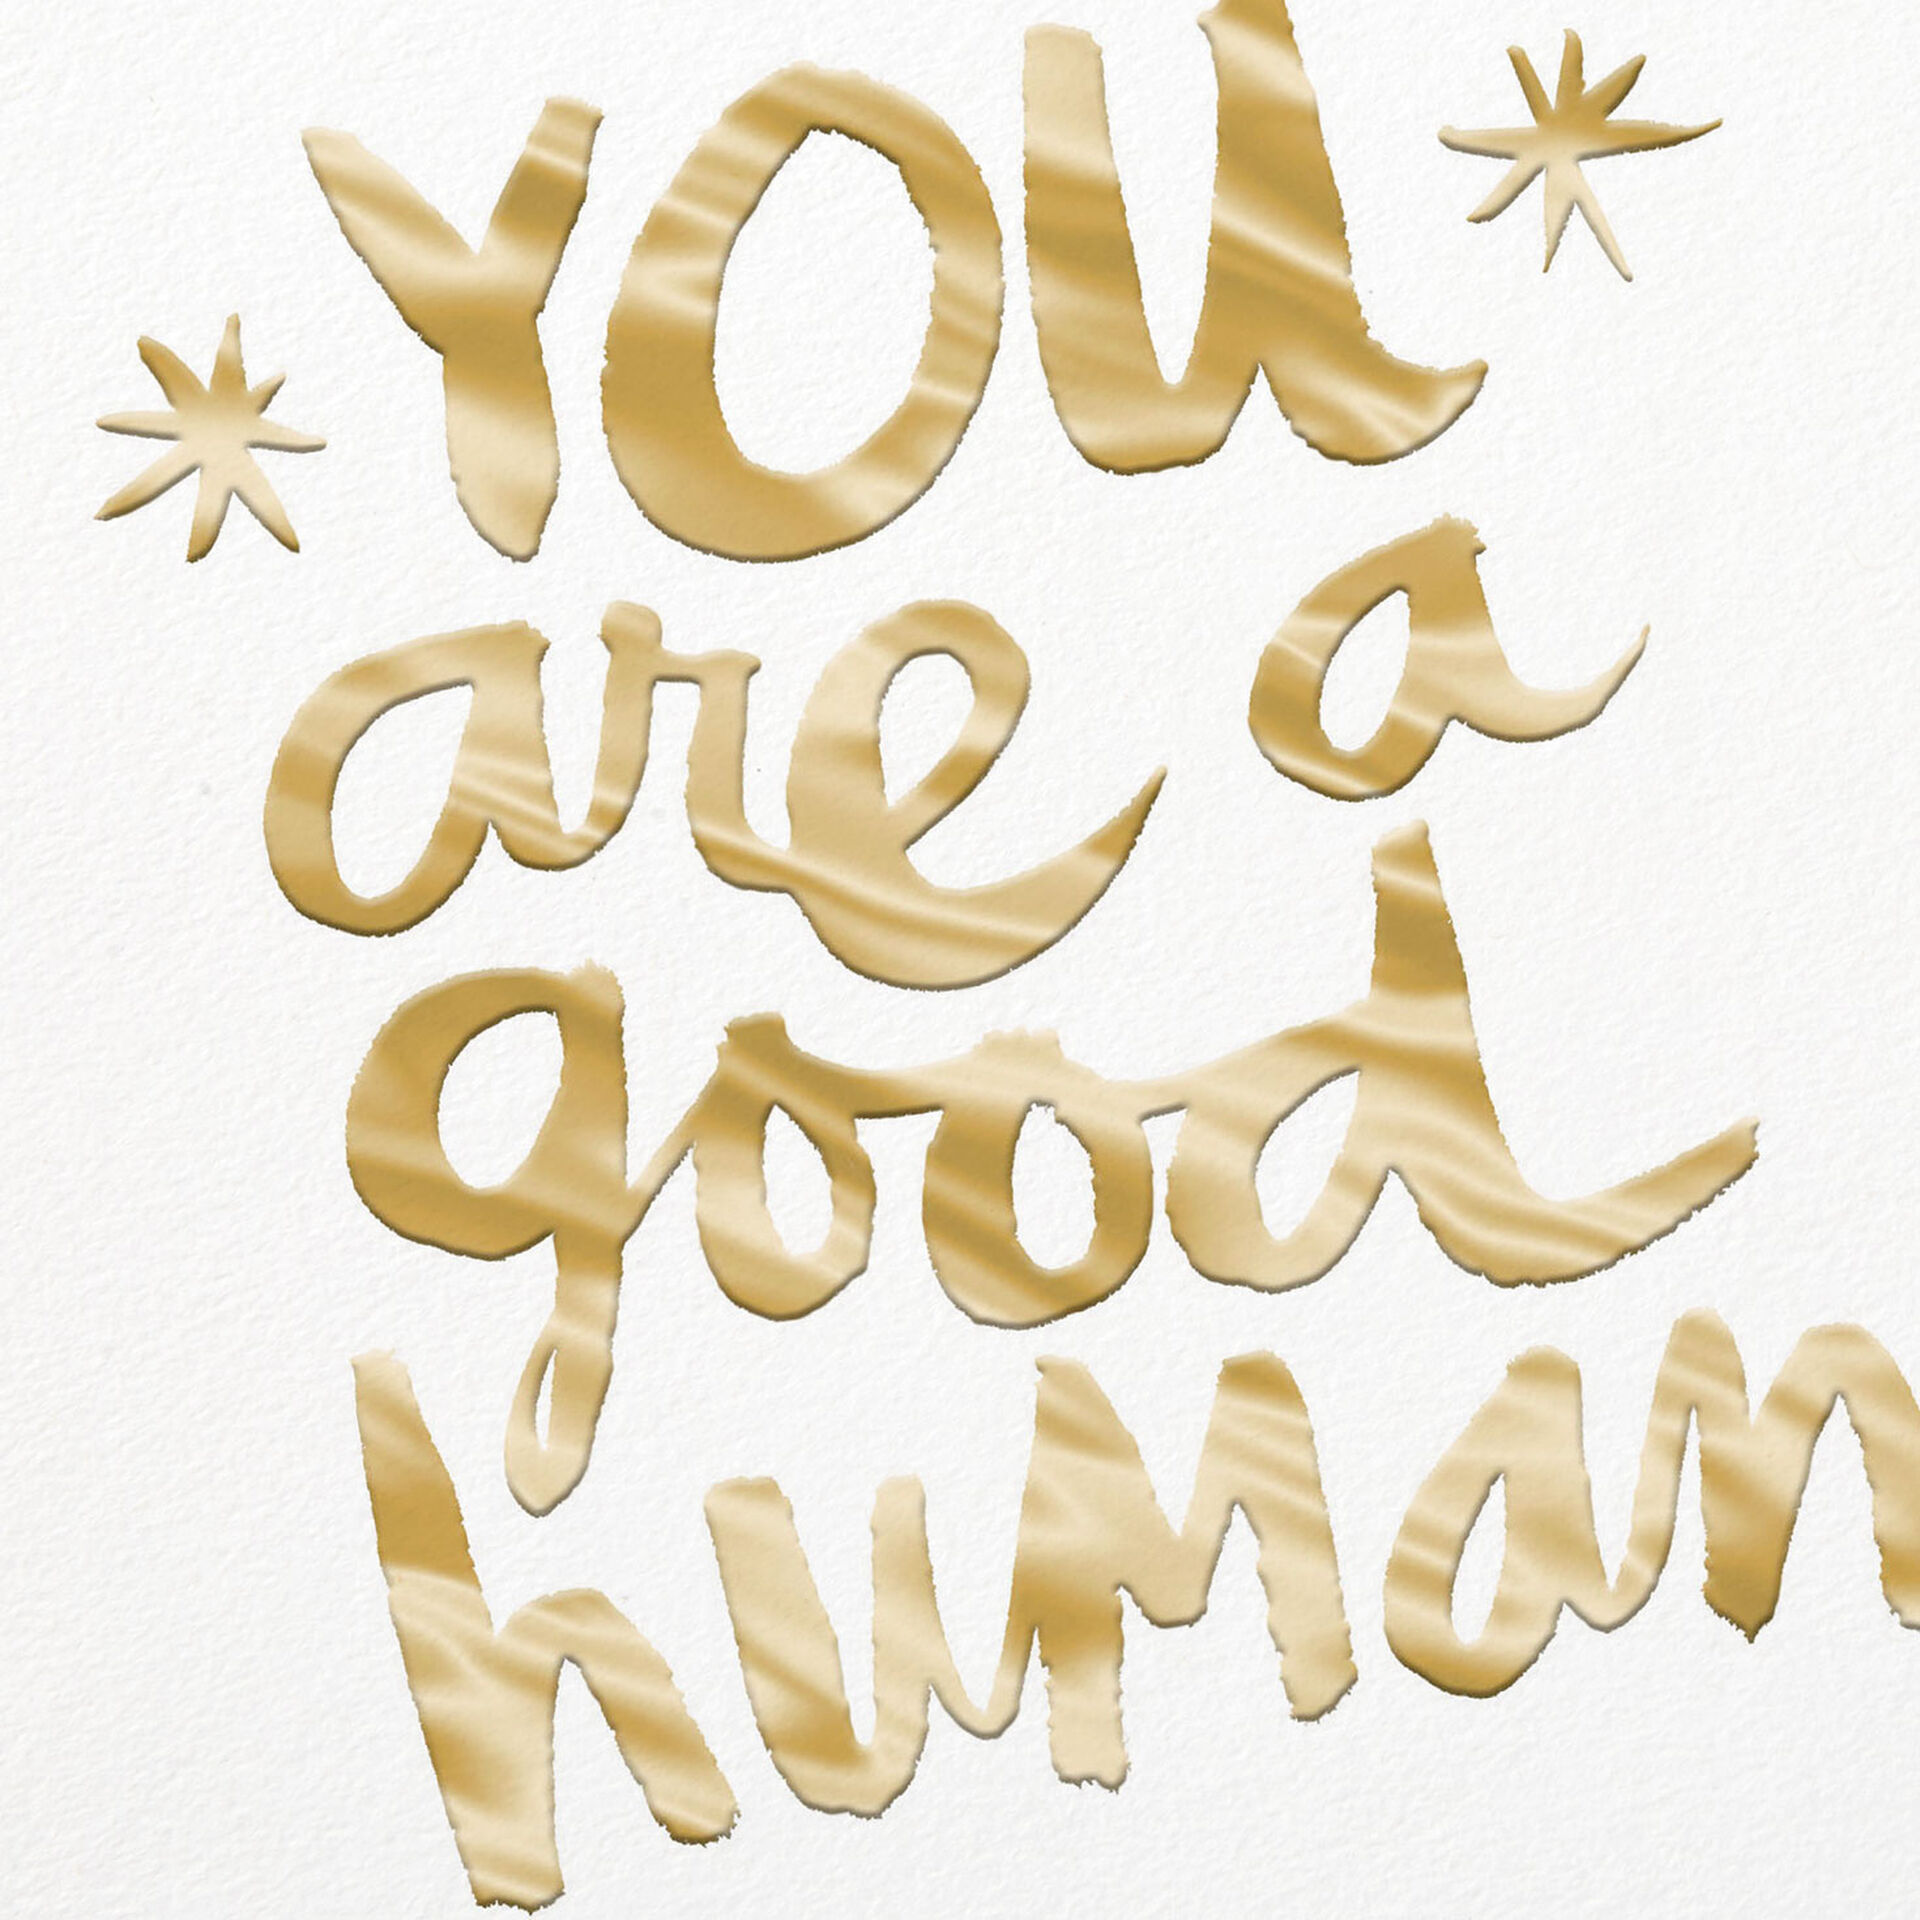 You-Are-a-Good-Human-Blank-Card_359YYF1323_03